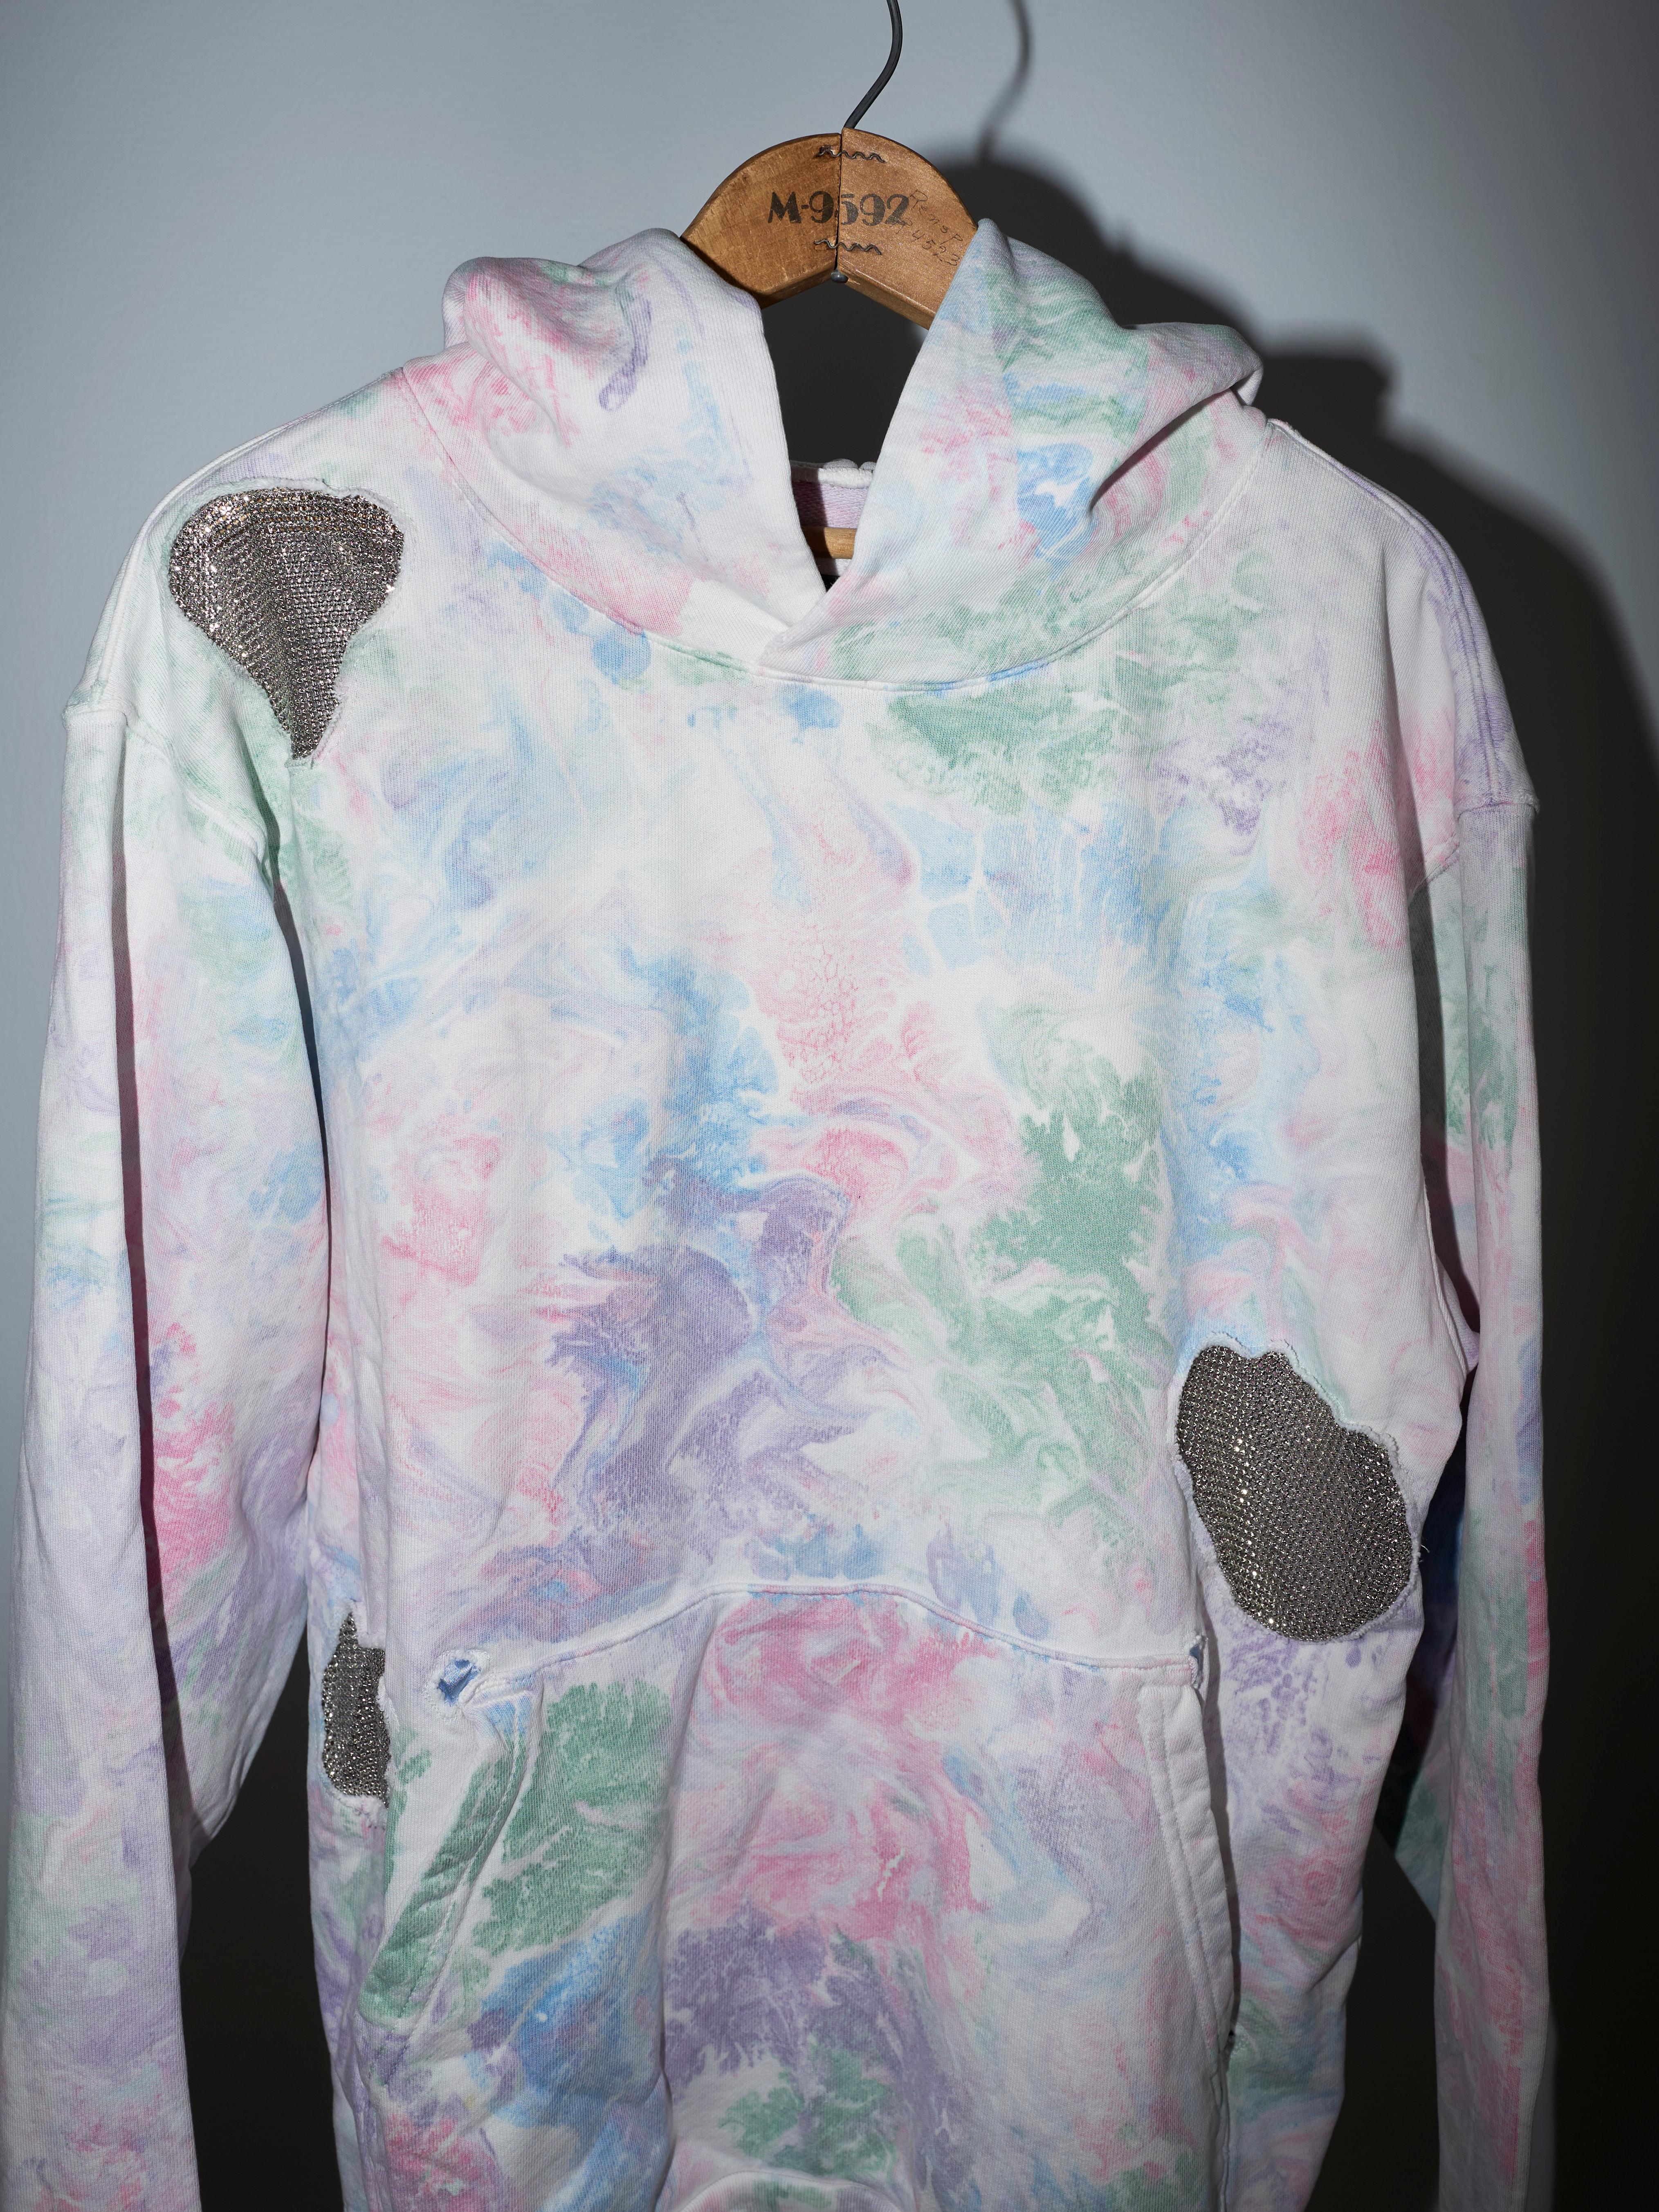 Hoodie Pastel Marble Cotton Embellished Chain Patchwork J Dauphin 4